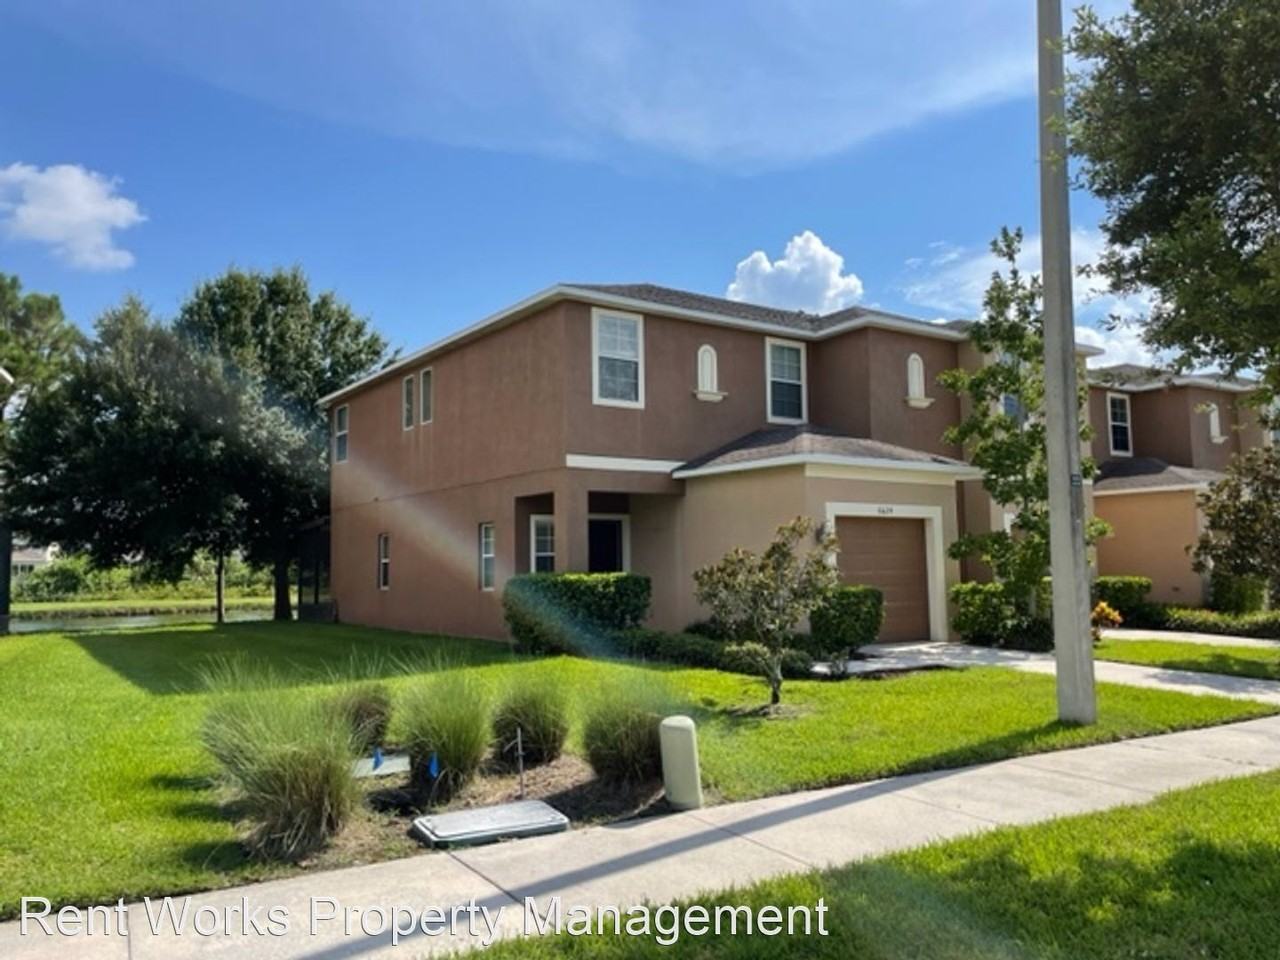 33578　FL　Heath　Riverview,　$2,075/month　6624　Holly　House　for　Dr,　Bedroom　Zumper